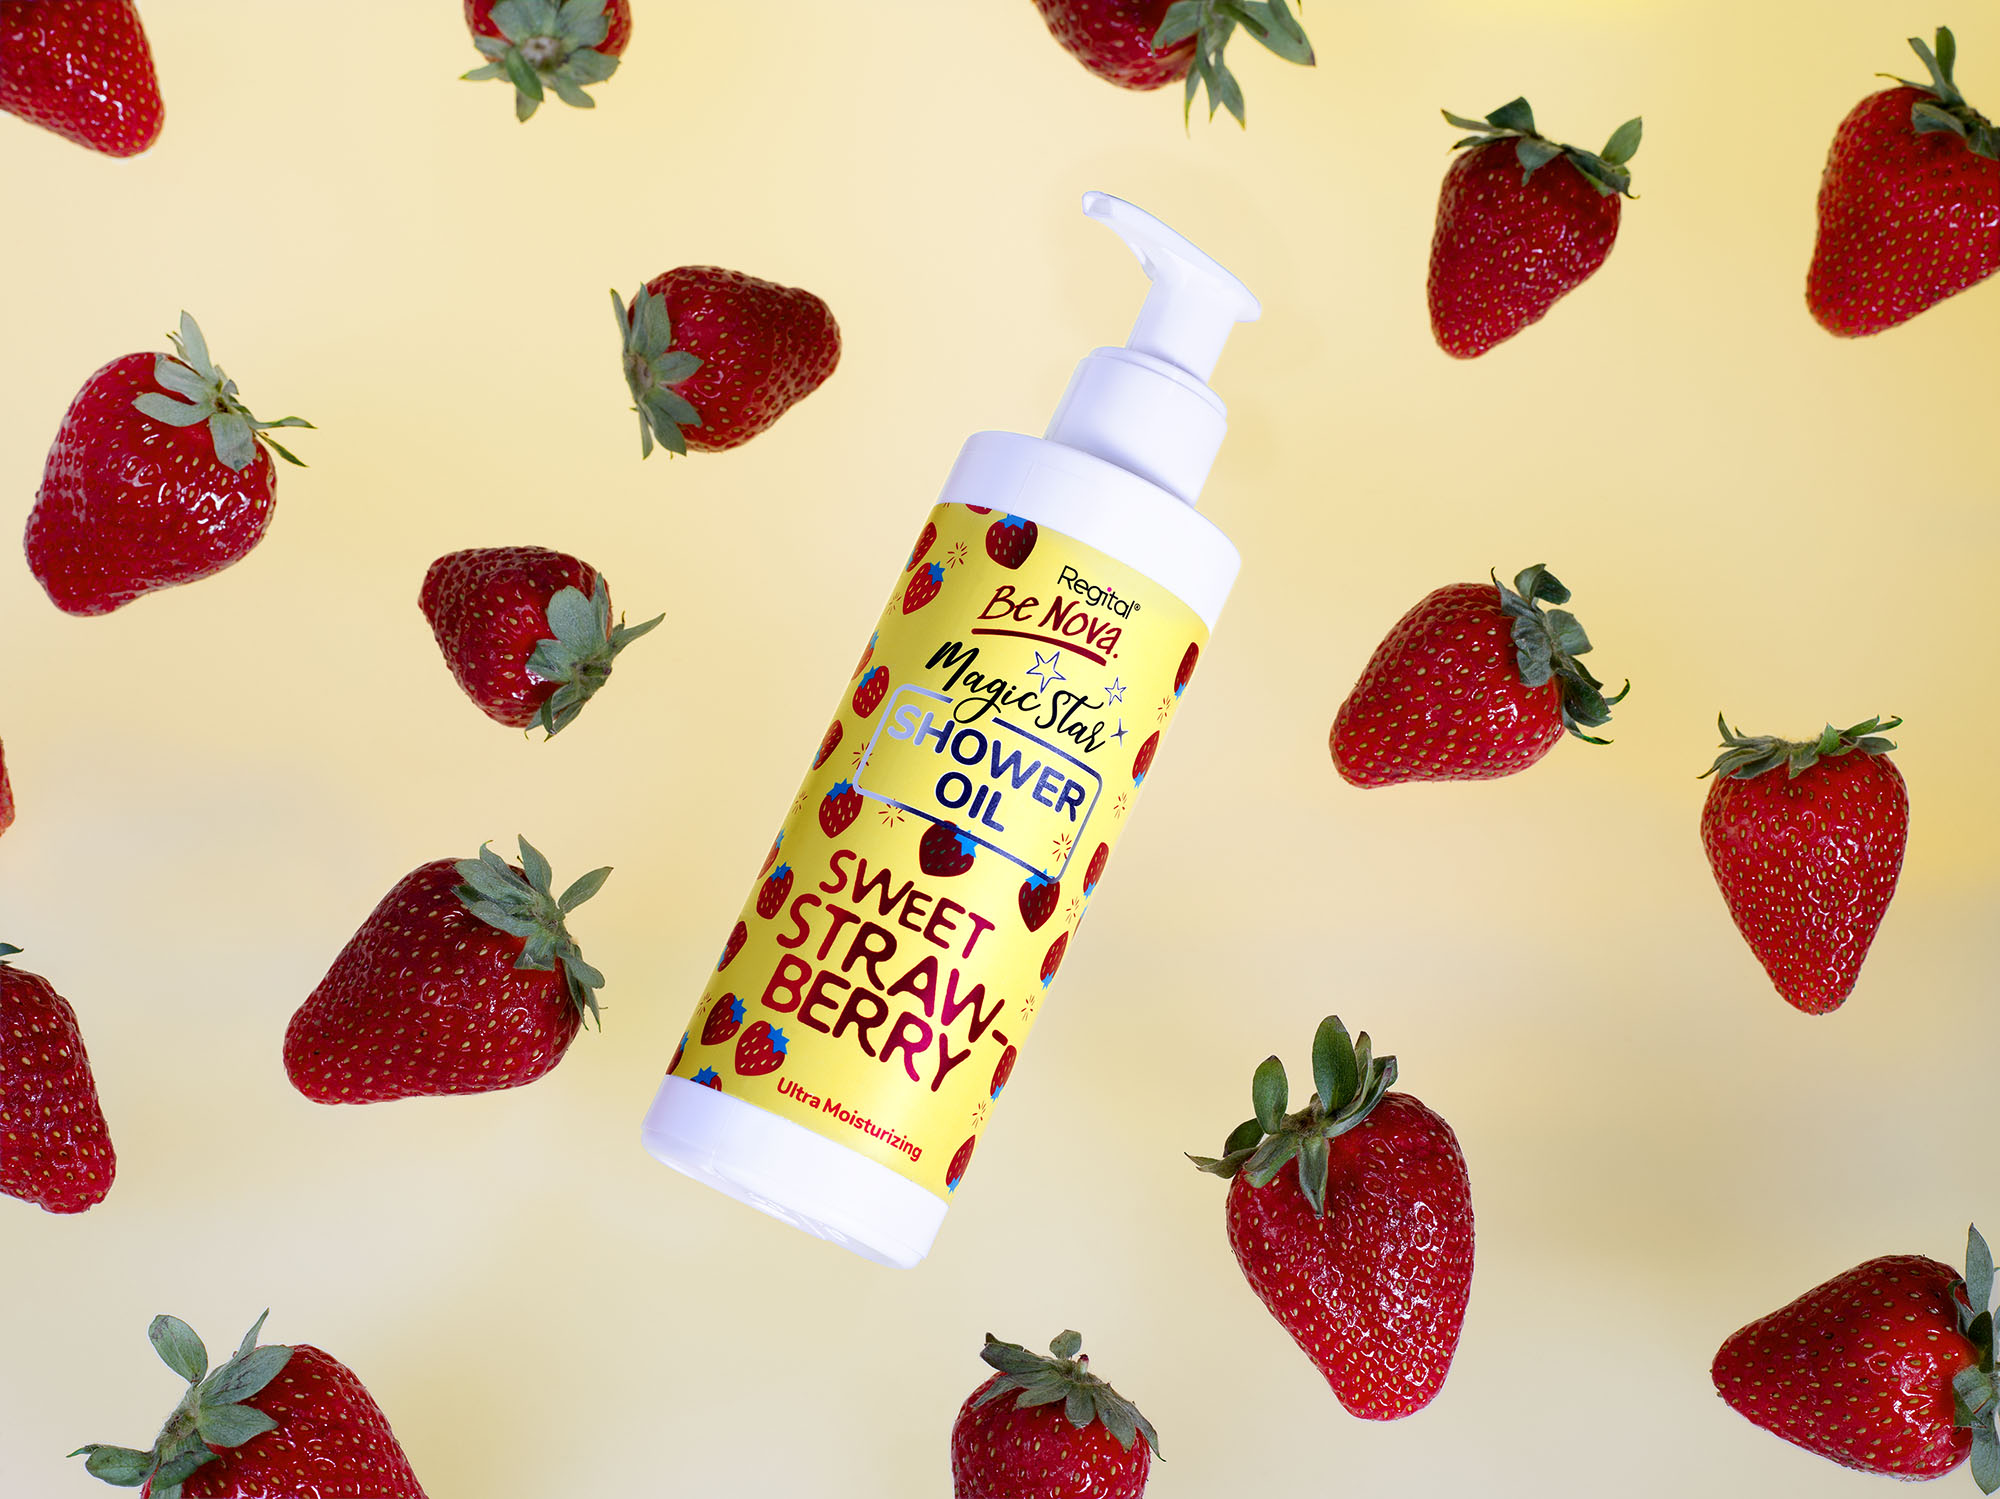 Surreal advertisement imagery by Caitlin Marjoram showing a reactionary response to a strawberry shower oil, presenting a colour and disoriented image